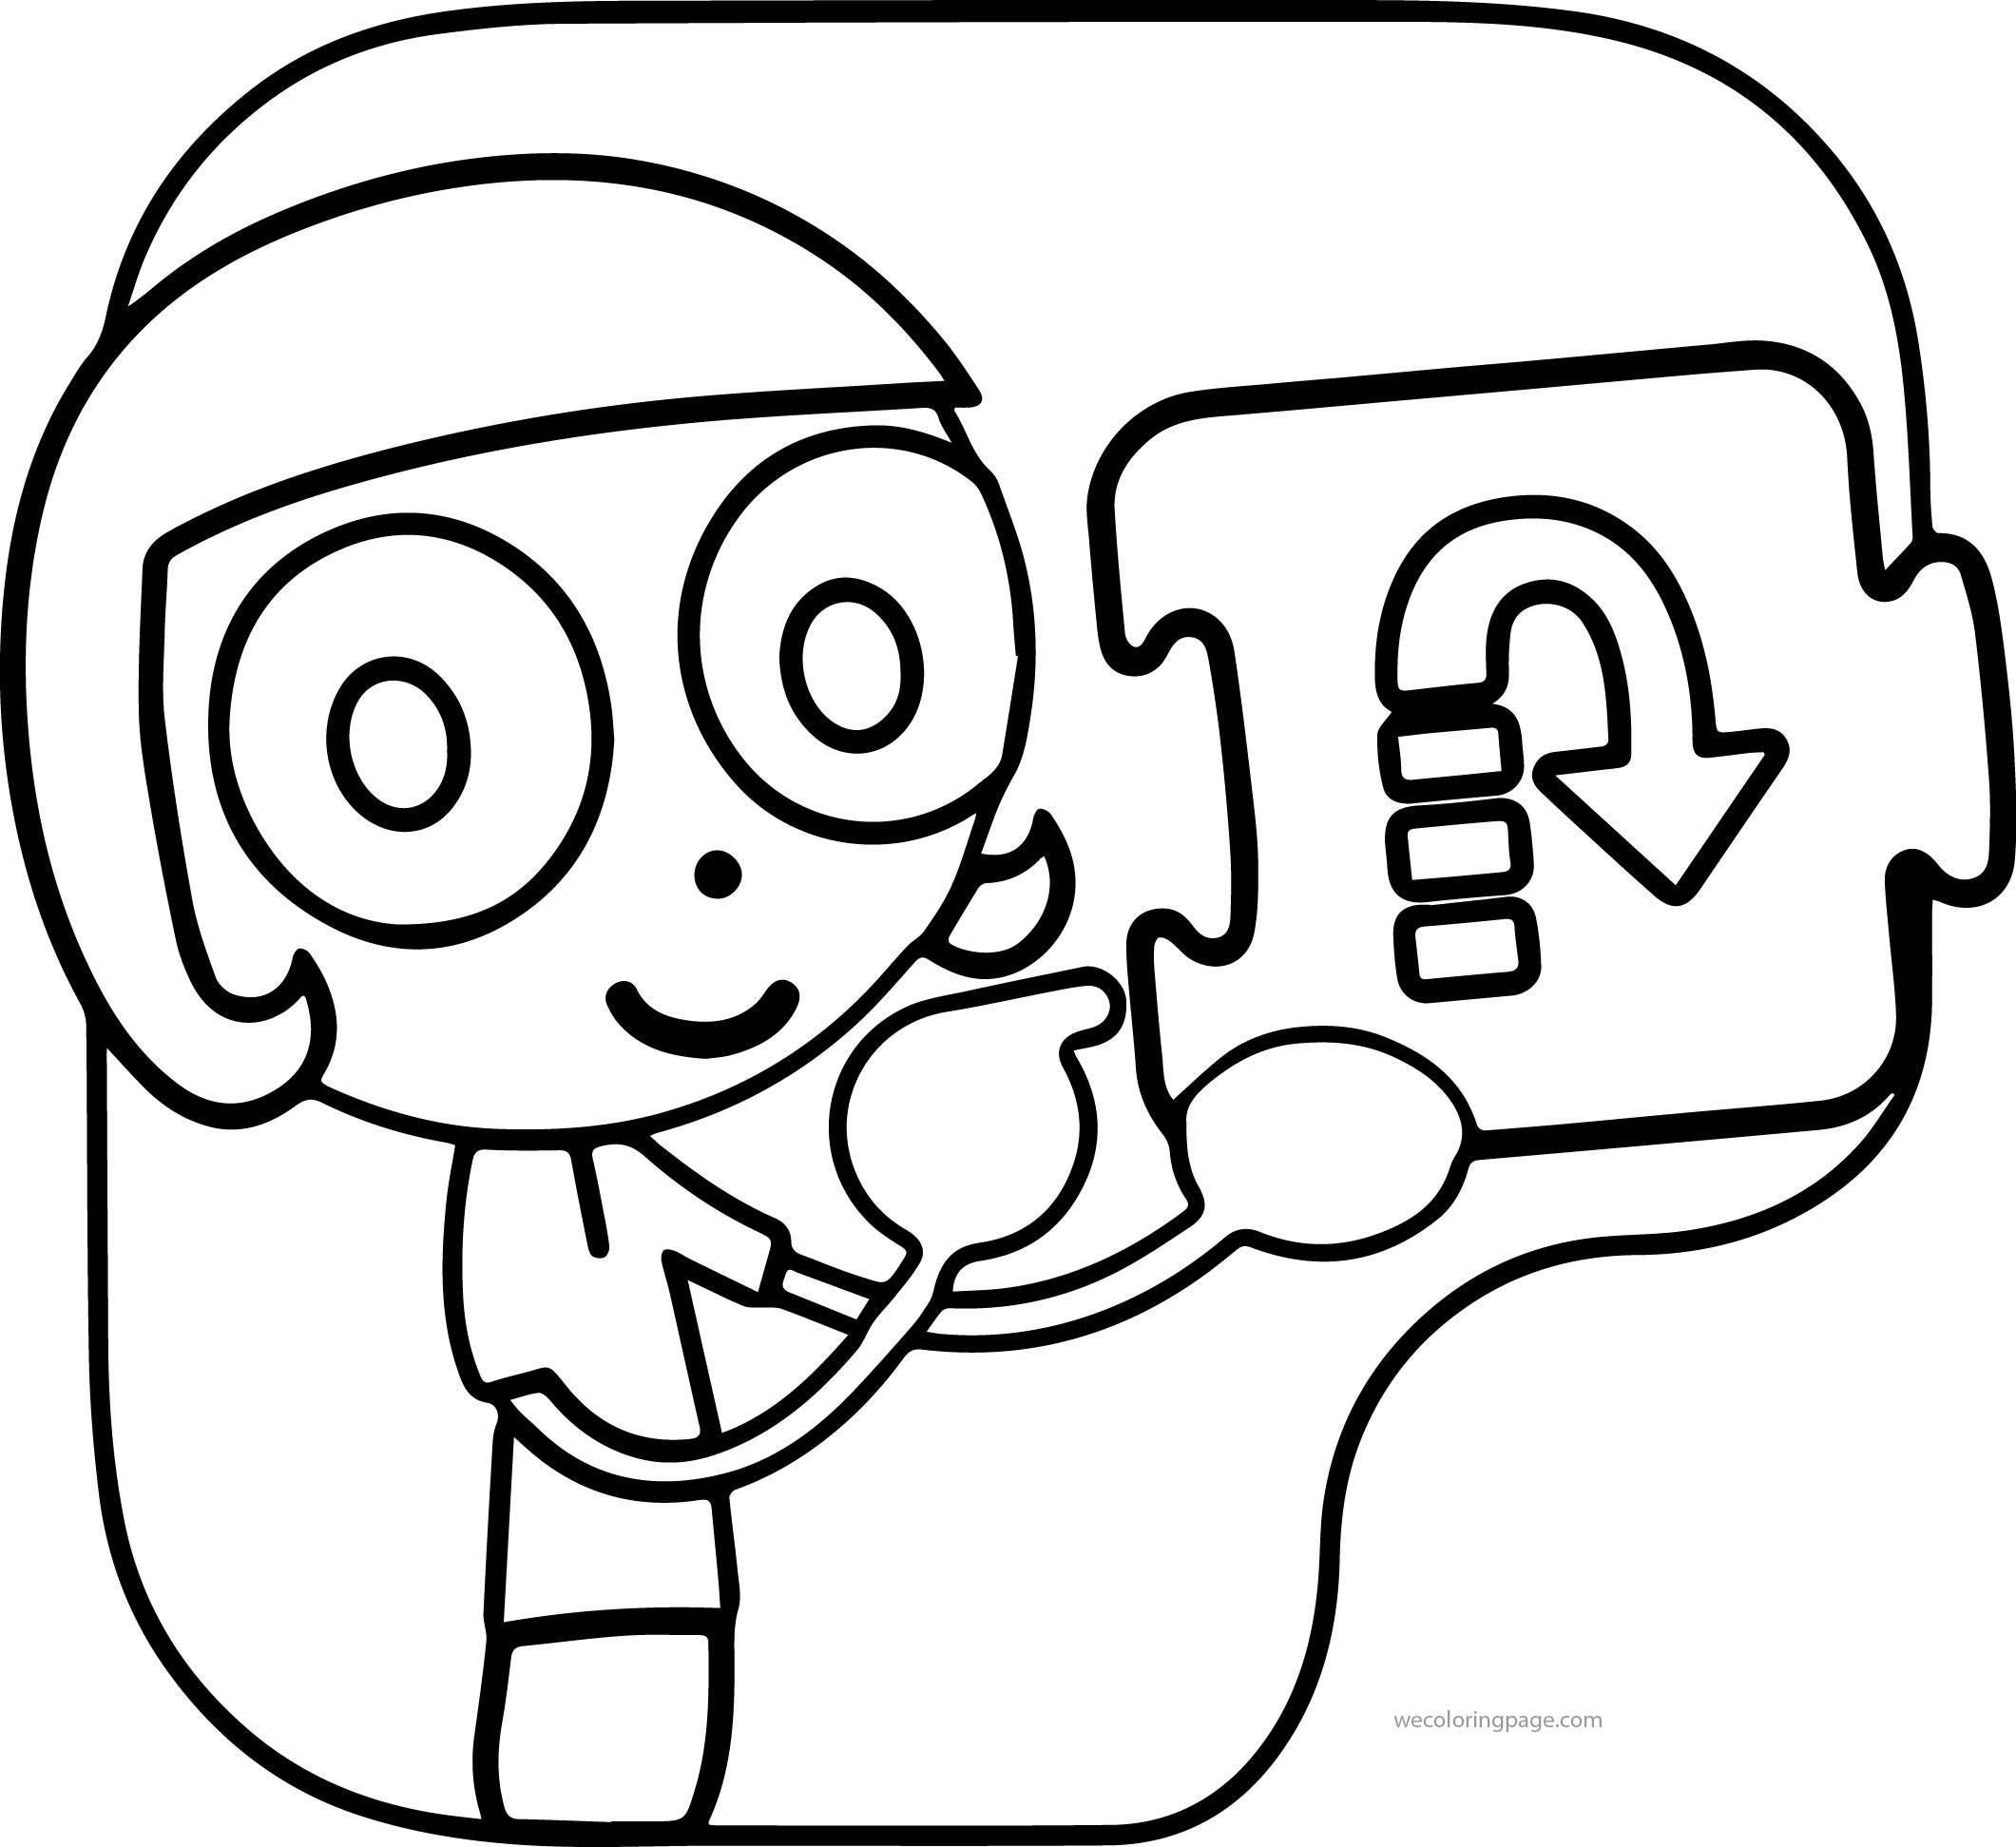 Pbs Kids Coloring Games
 Pbs Kids Coloring Pages Az Sketch Coloring Page